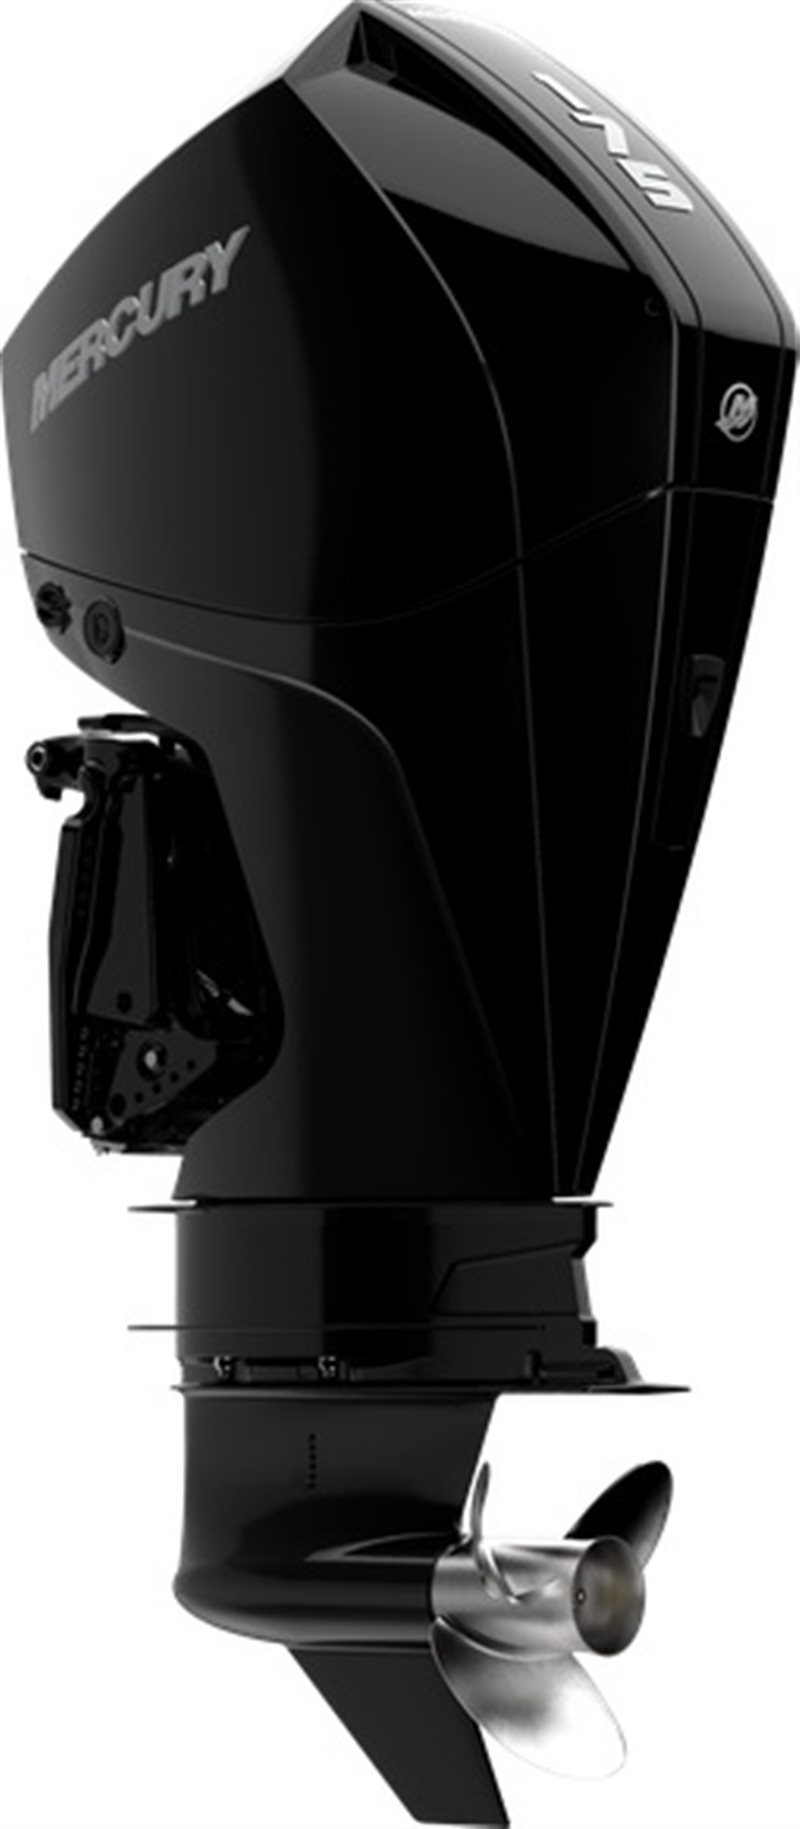 2021 Mercury Outboard Fourstroke 175 - 300 175 HP at DT Powersports & Marine